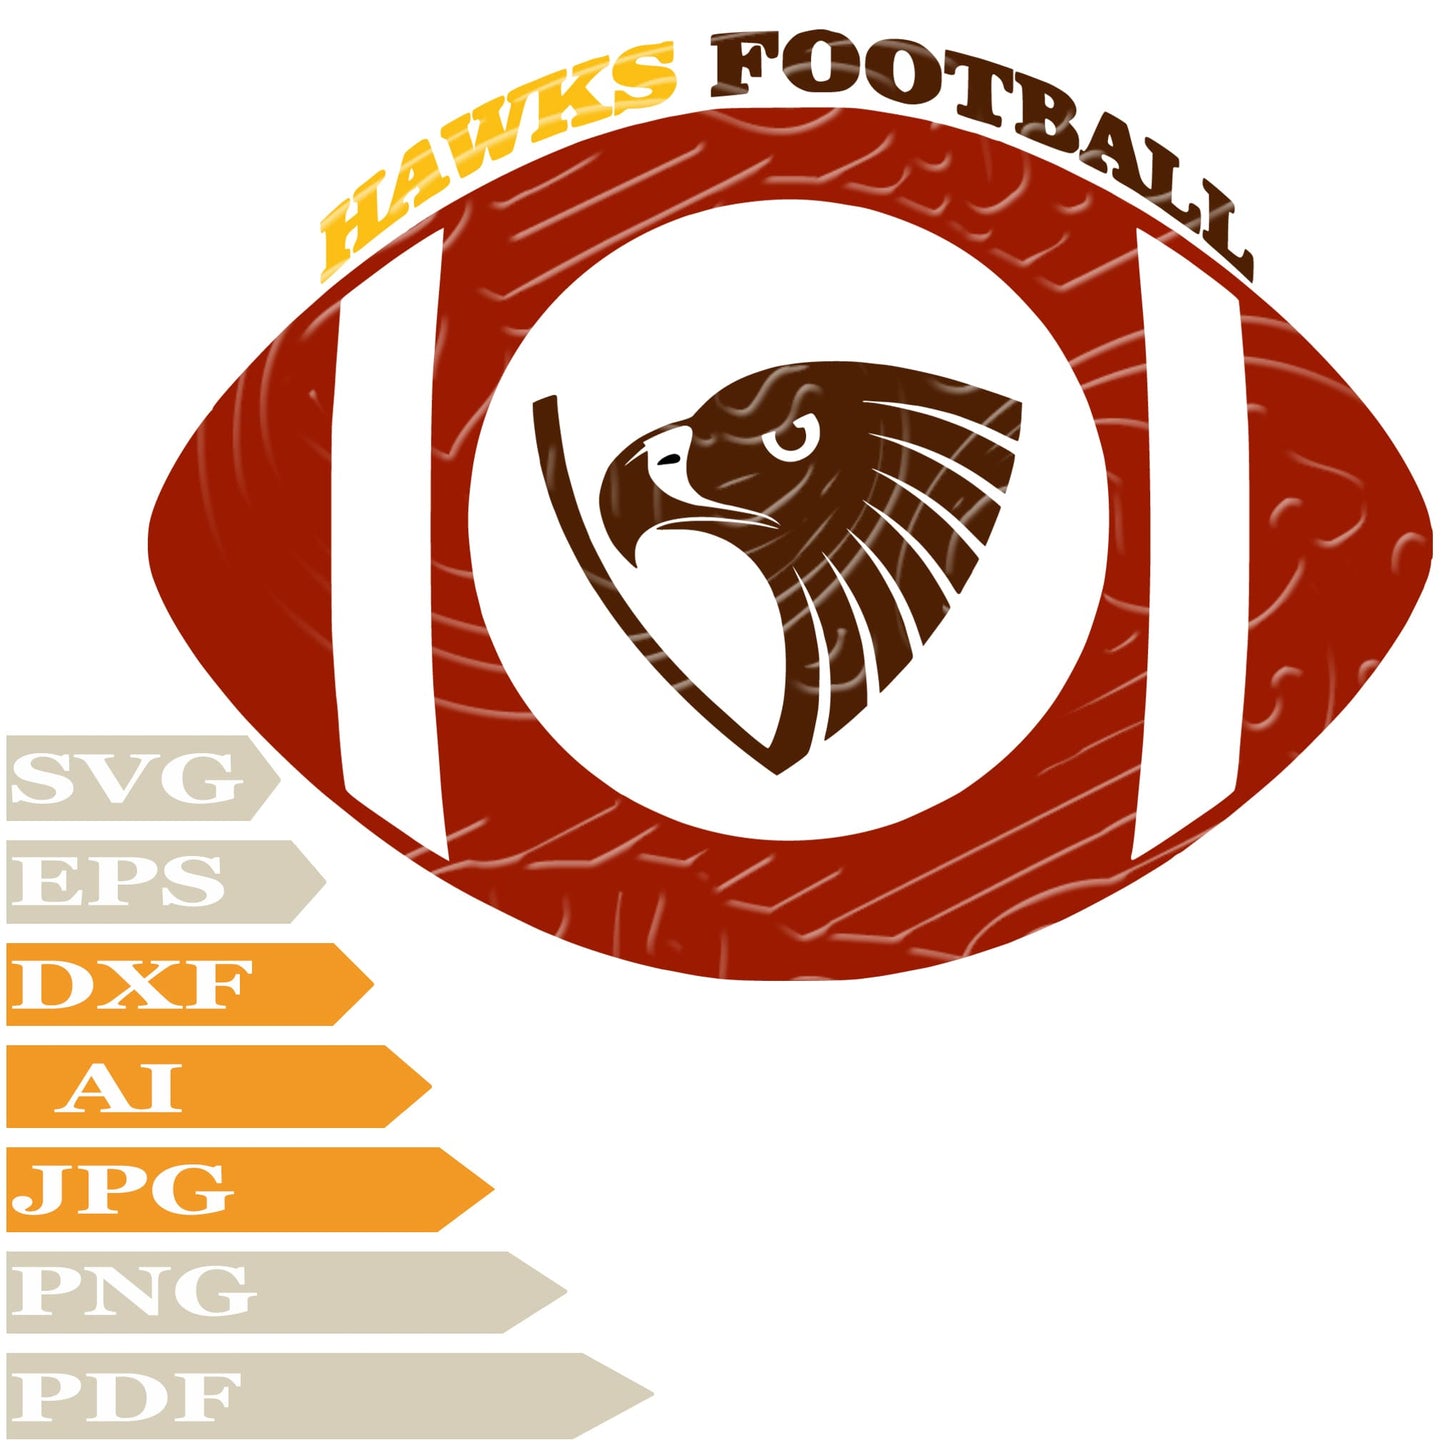 Hawks, Hawks Football Logo Svg File, Image Cut, Png, For Tattoo, Silhouette, Digital Vector Download, Cut File, Clipart, For Cricut